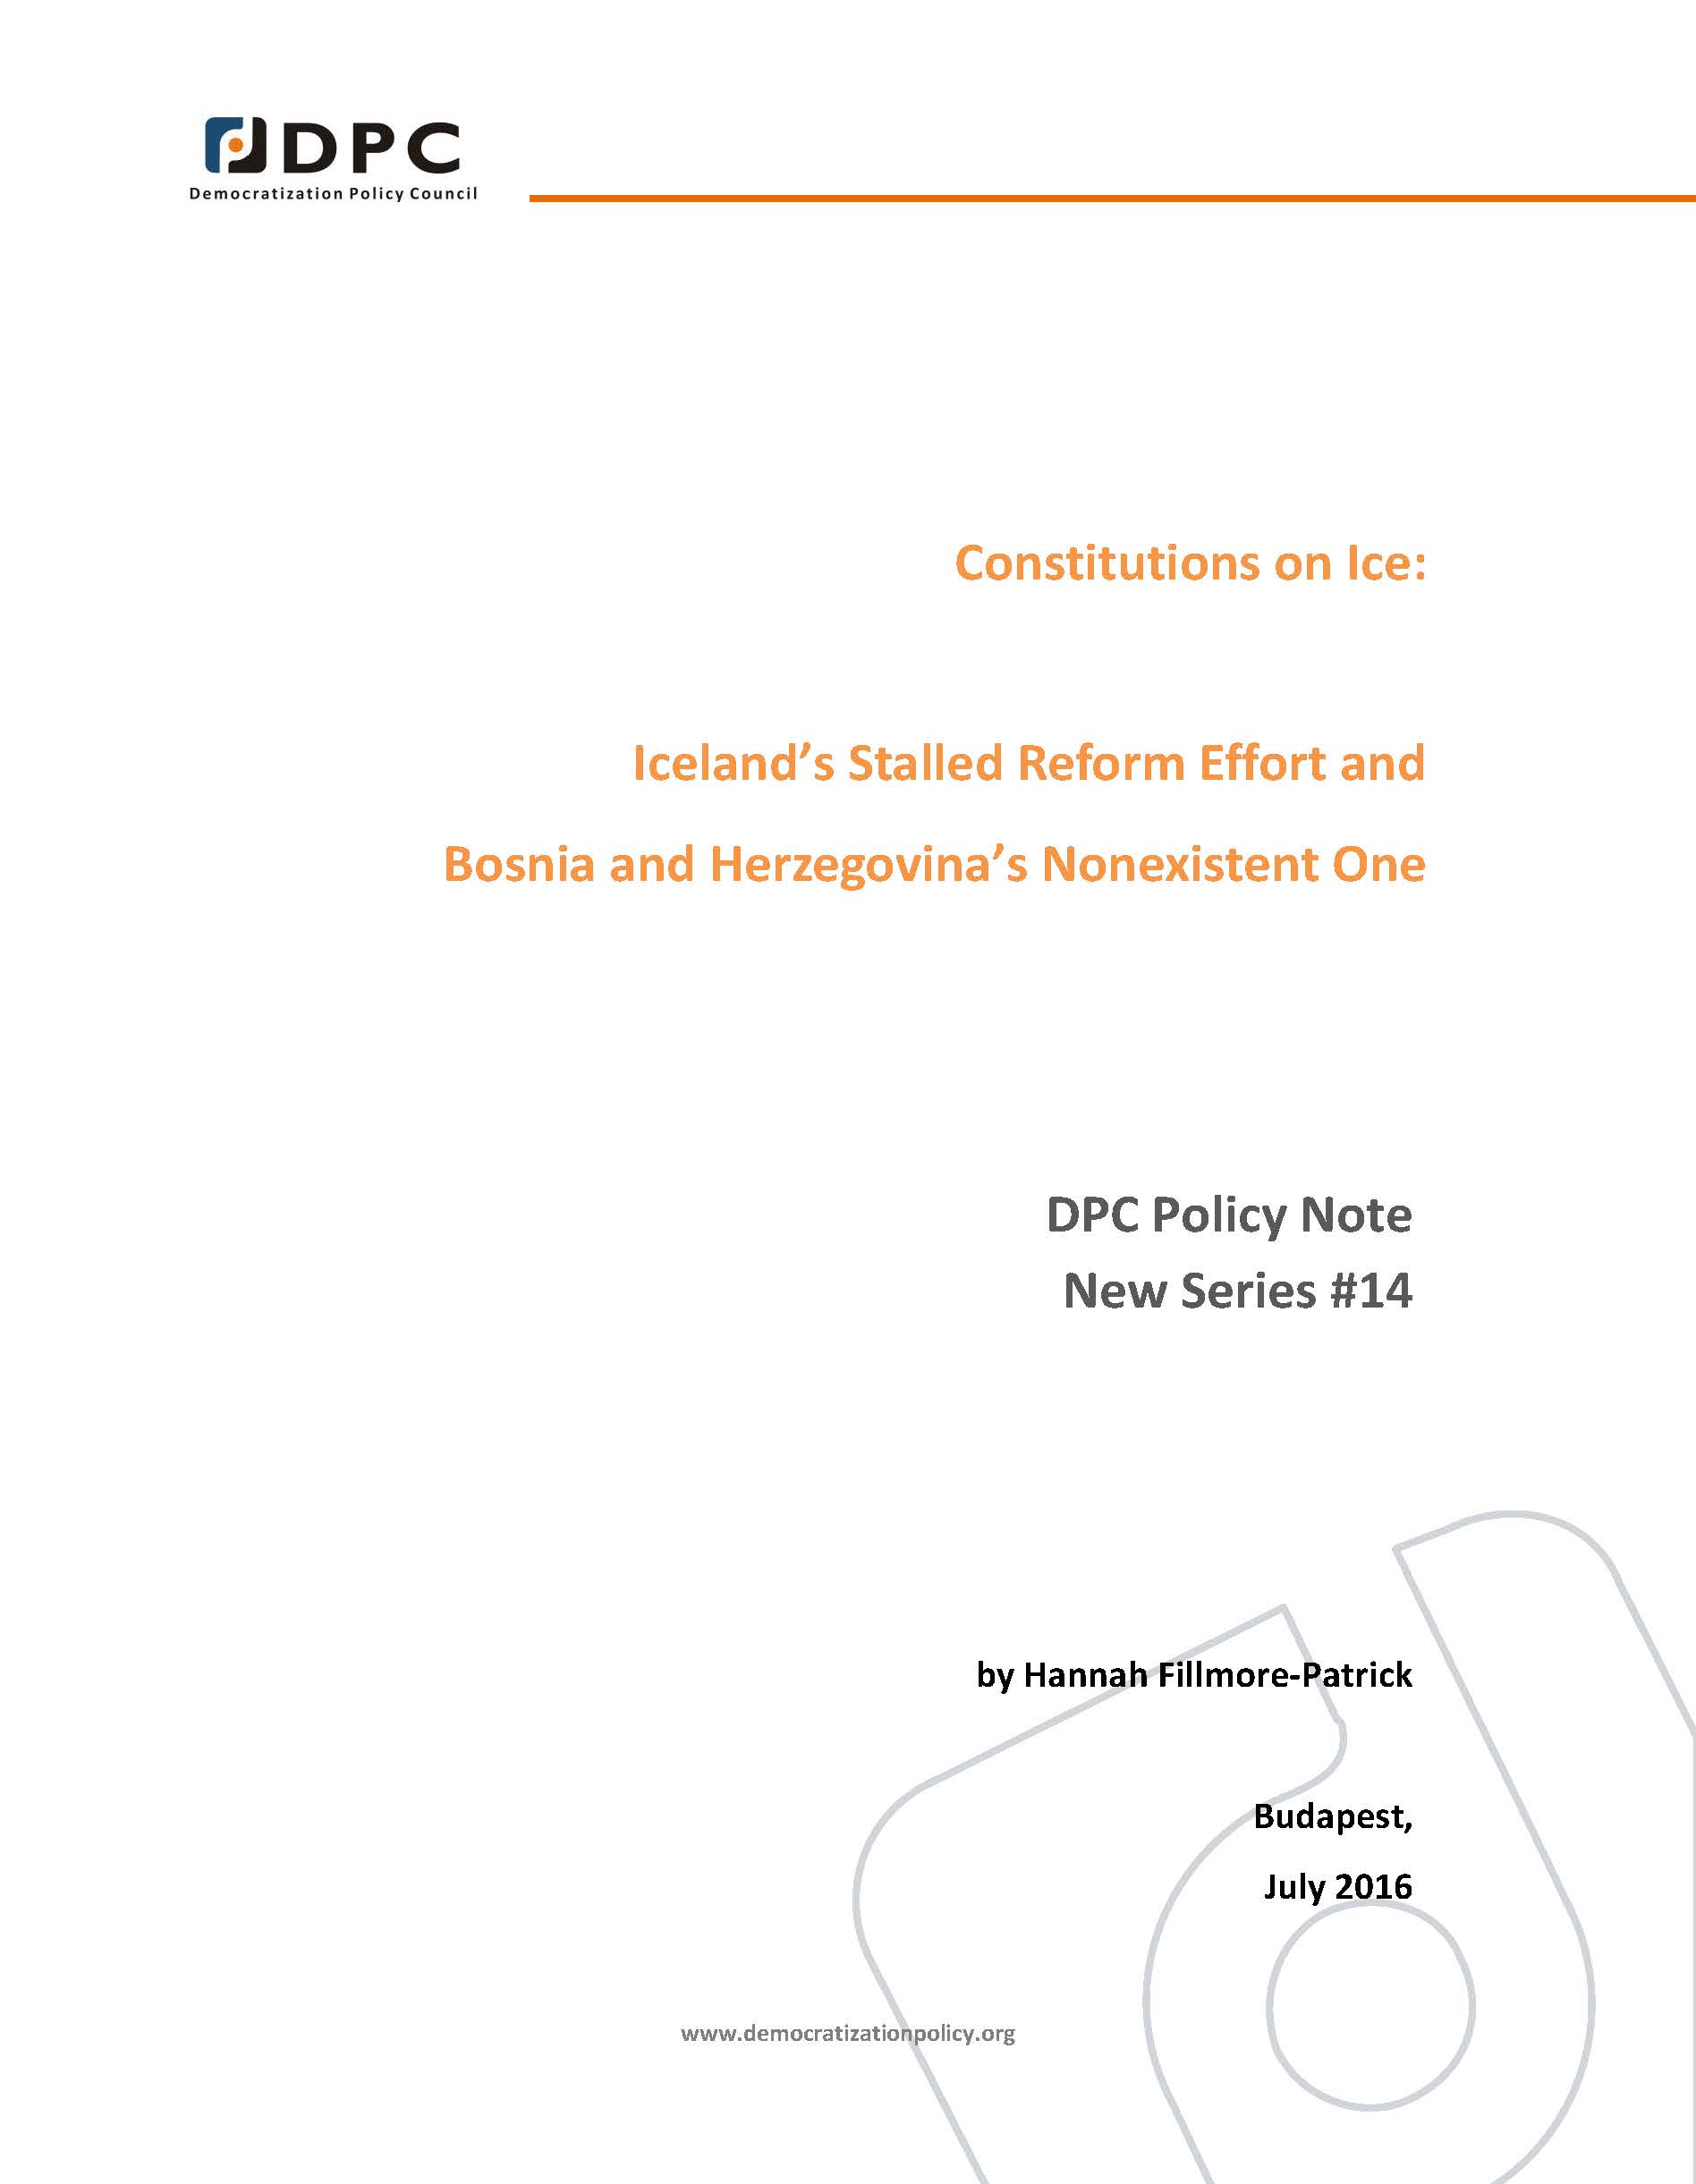 DPC POLICY NOTE 14: Constitutions on Ice: Iceland’s Stalled Reform Effort and Bosnia and Herzegovina’s Nonexistent One.